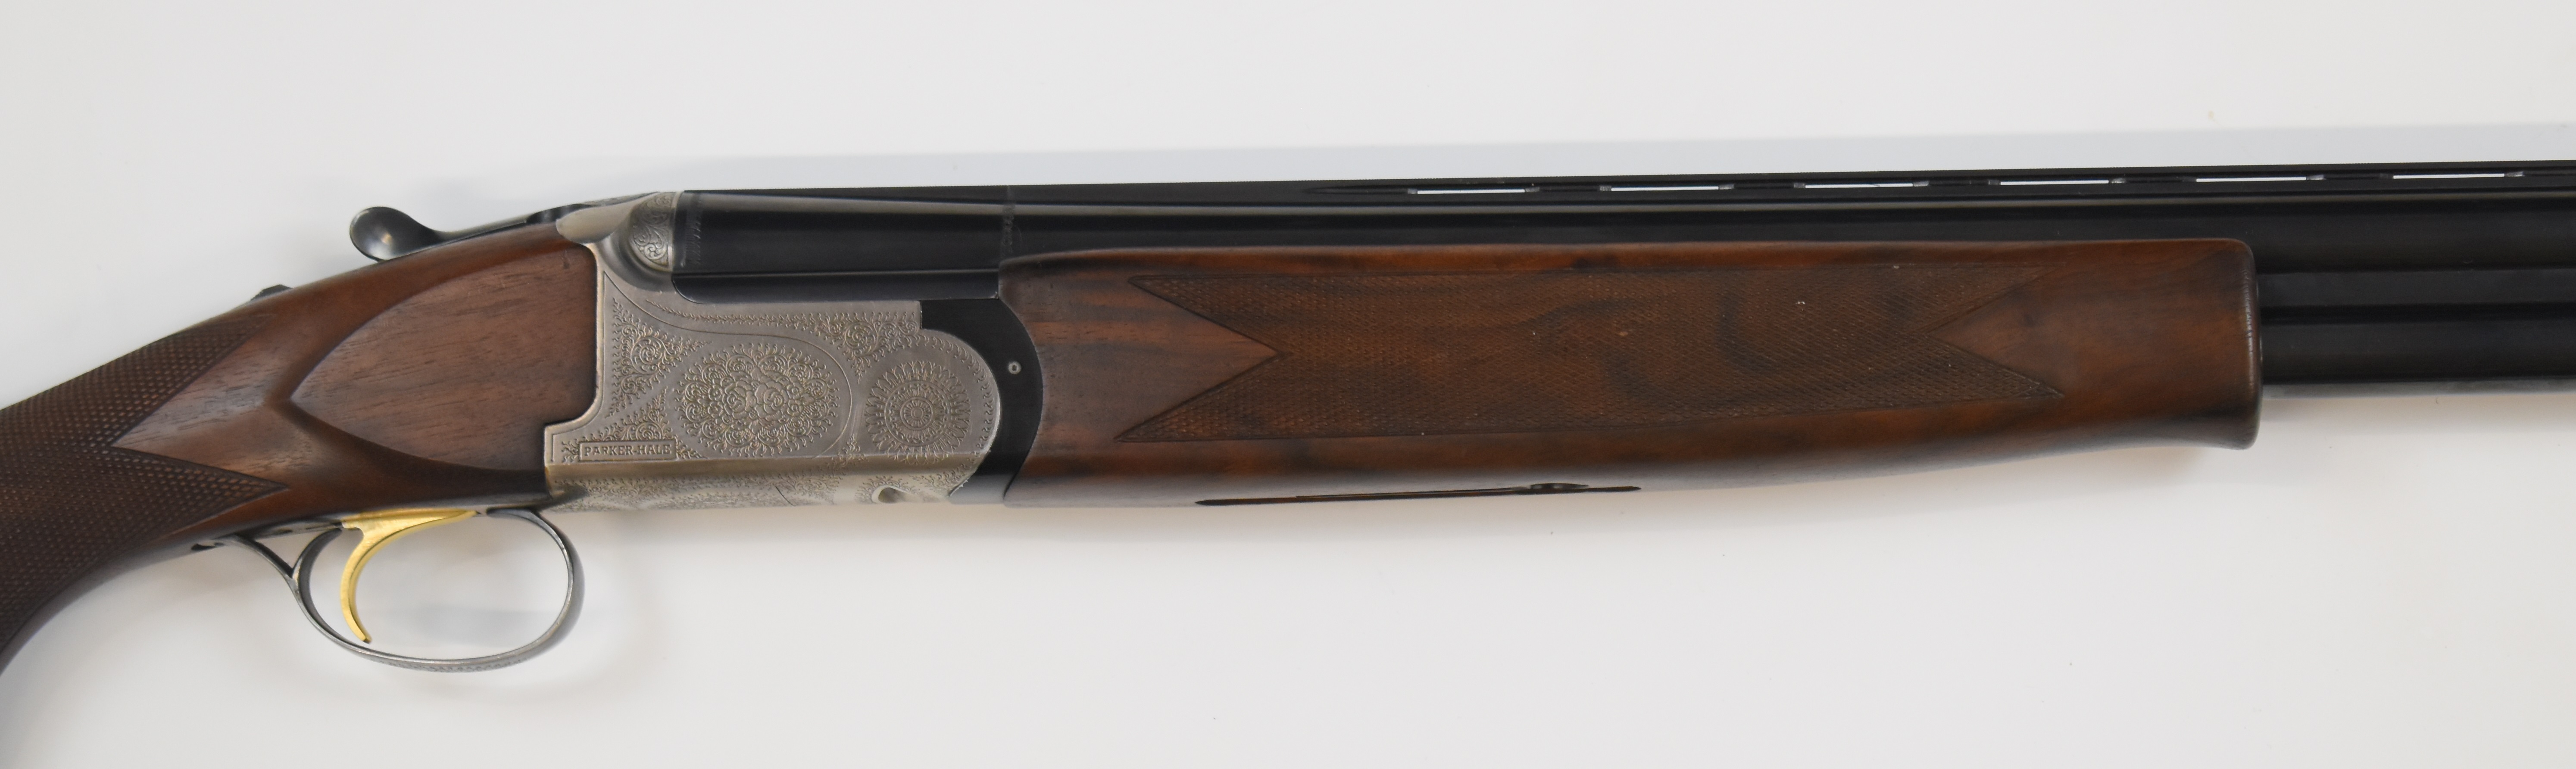 Parker-Hale 12 bore over and under ejector shotgun with named and engraved lock, engraved trigger - Image 4 of 10